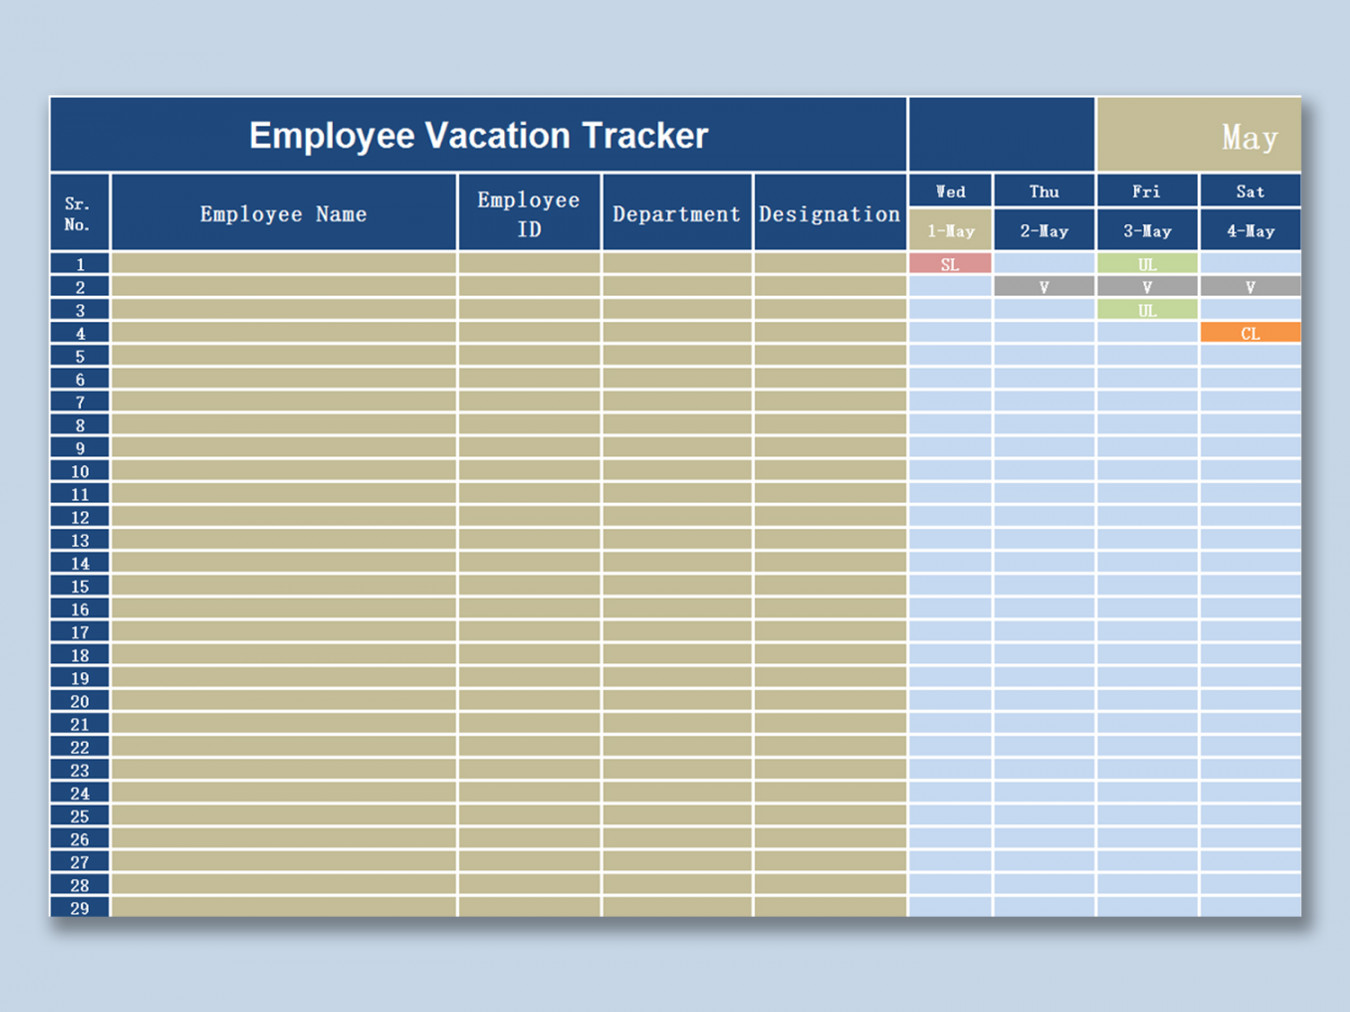 EXCEL of Employee Vacation Tracker